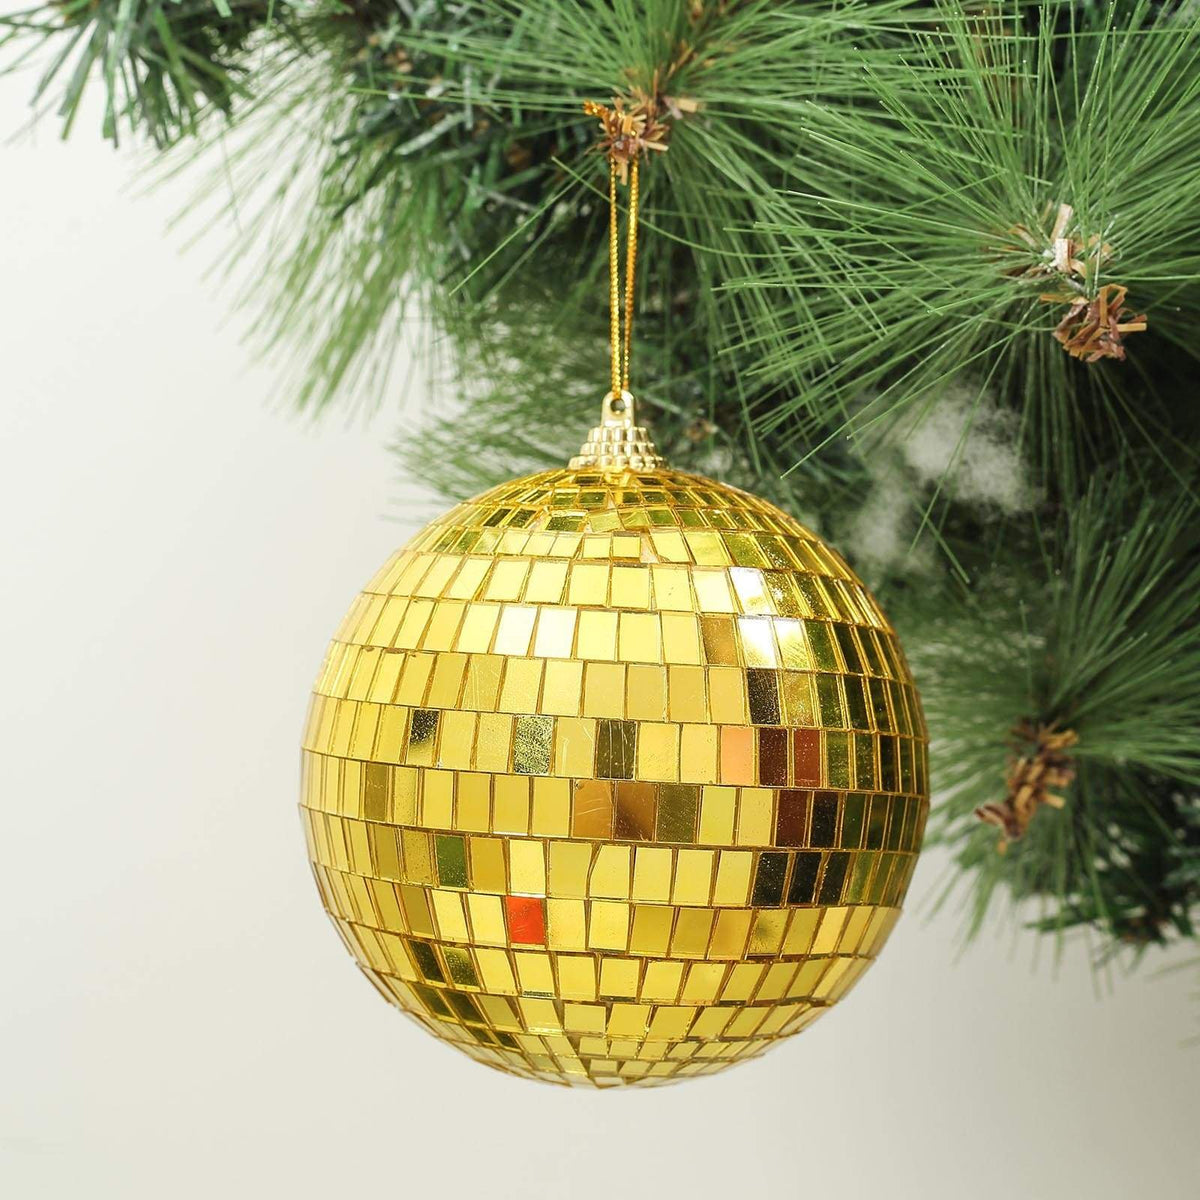 Love this gold and silver mirror ball ceiling.  Disco party decorations,  Gold party, Silver party